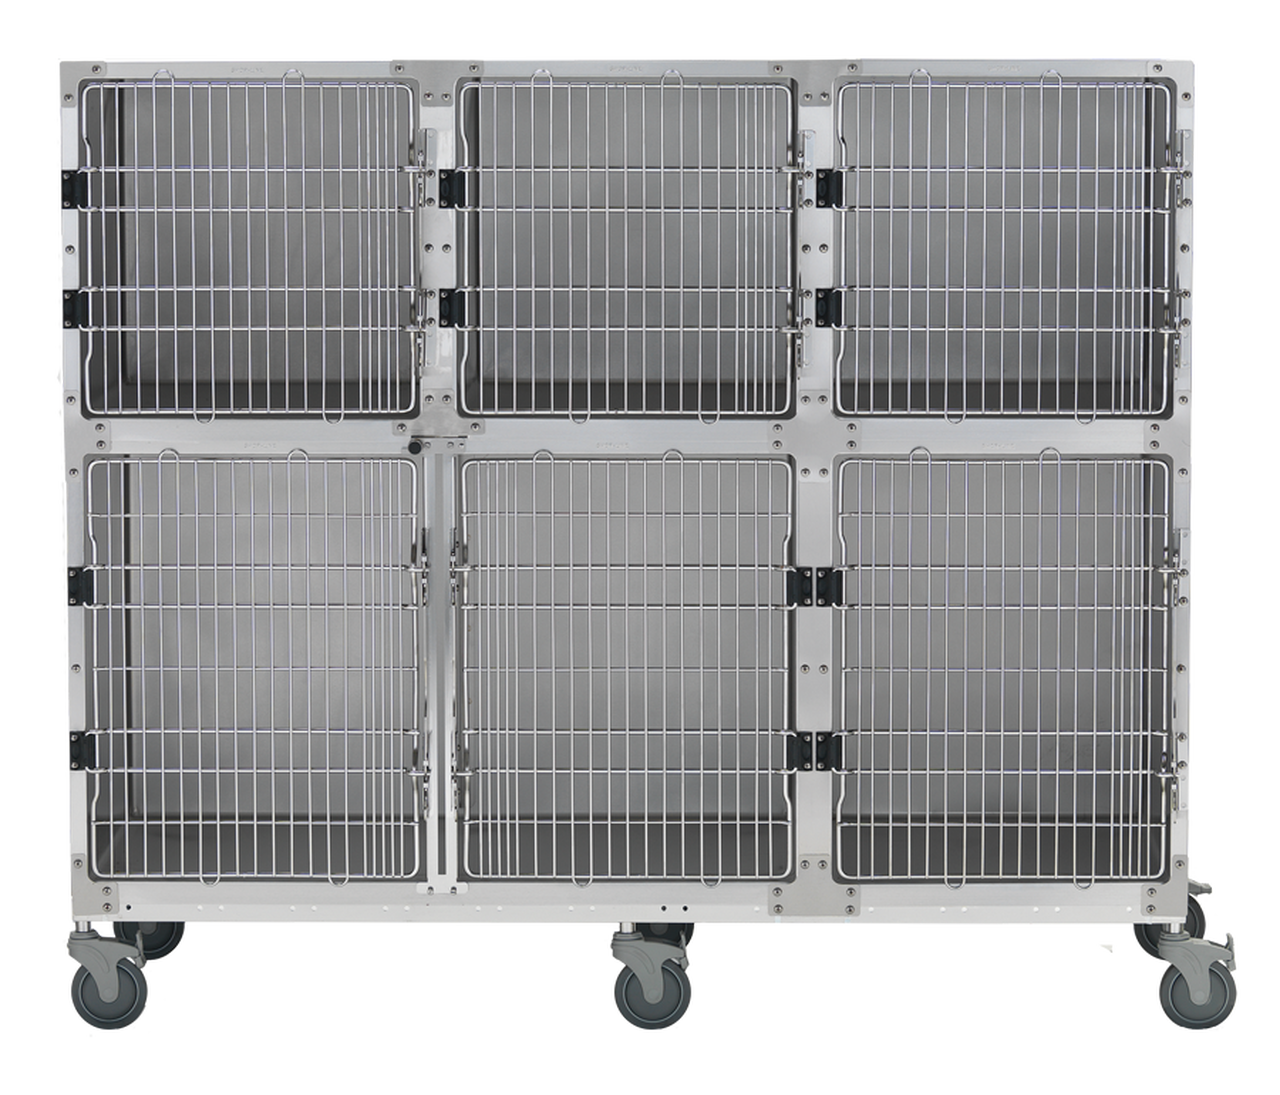 Shor-Line 6' Cage Assembly, Stainless Steel - Option C-Grooming Cage Bank-Pet's Choice Supply